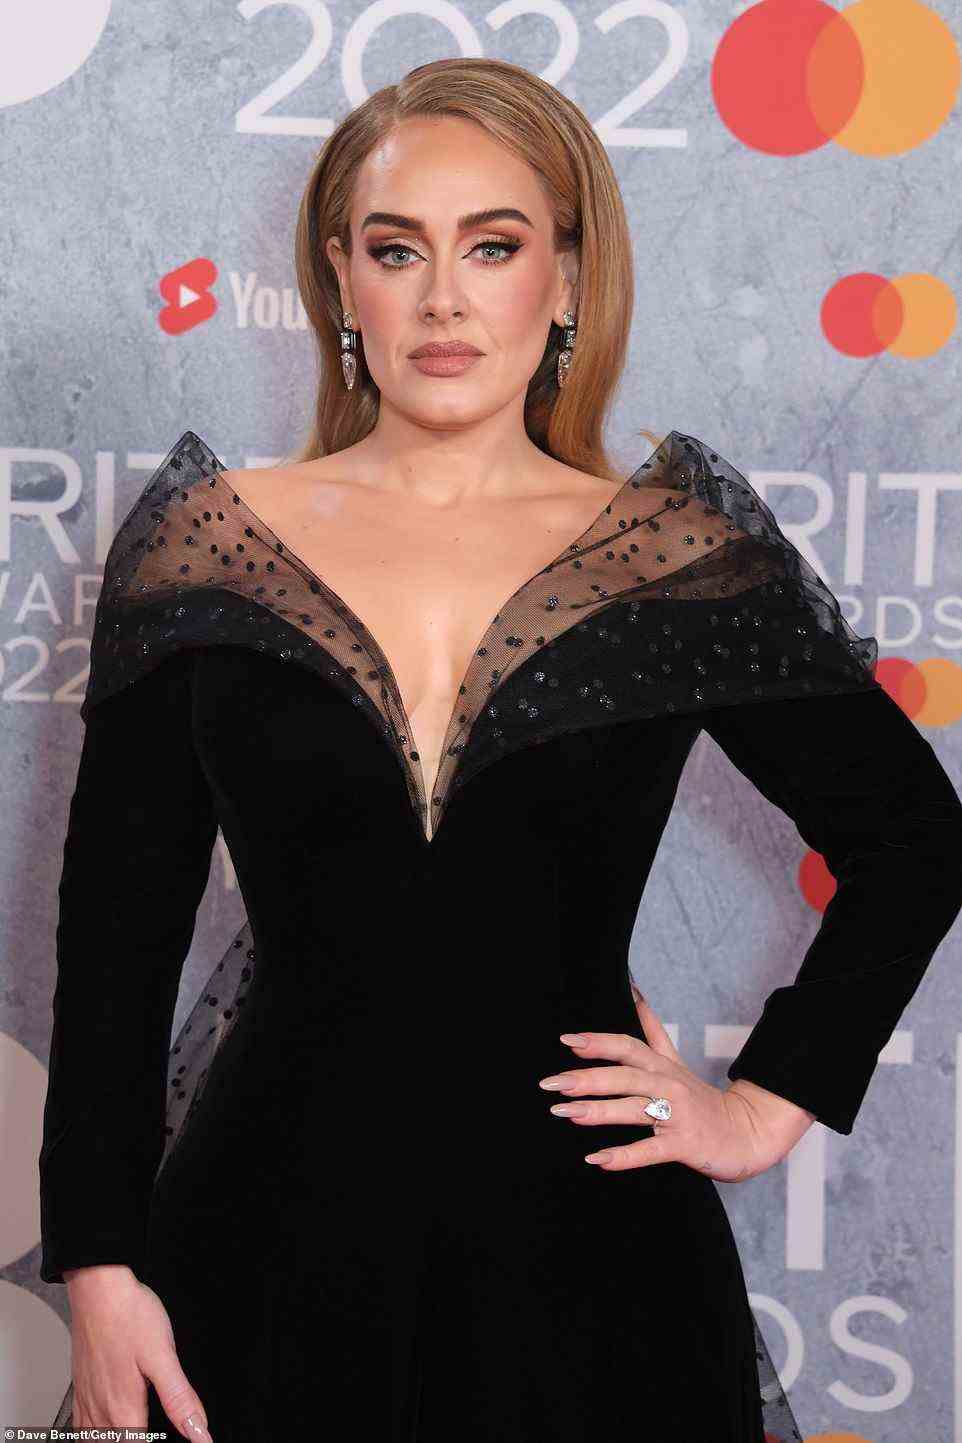 Glowing: Adele wore her hair perfectly blow dried in a sleek style and opted for a typically glamorous makeup look